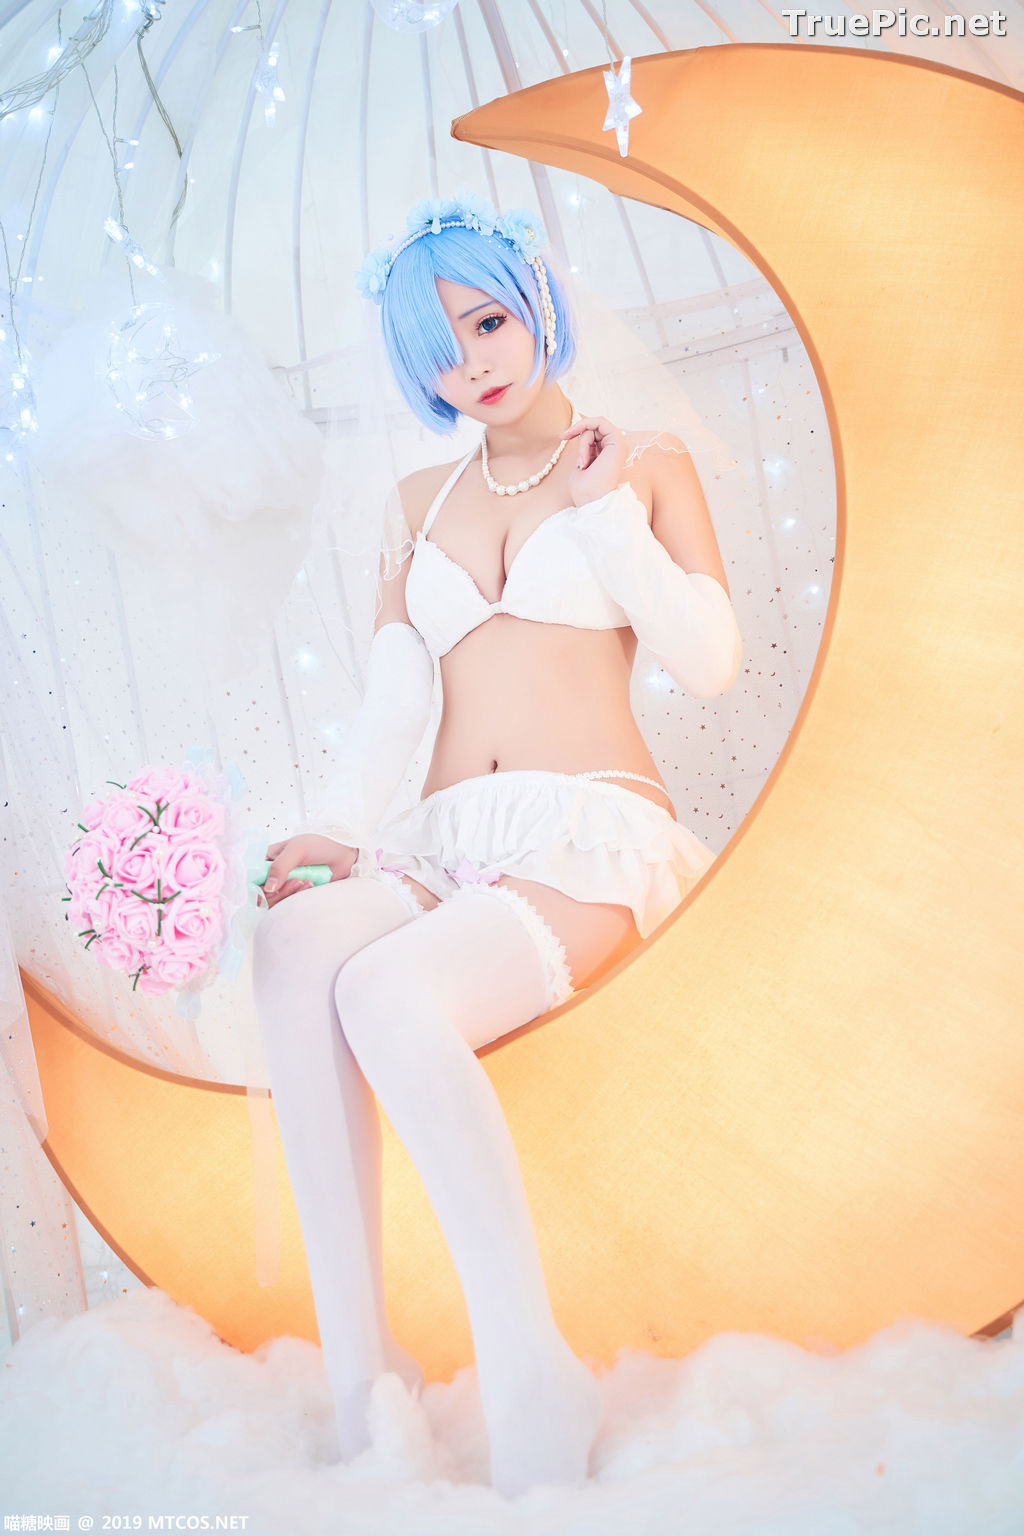 Image [MTCos] 喵糖映画 Vol.043 – Chinese Cute Model – Sexy Rem Cosplay - TruePic.net - Picture-14